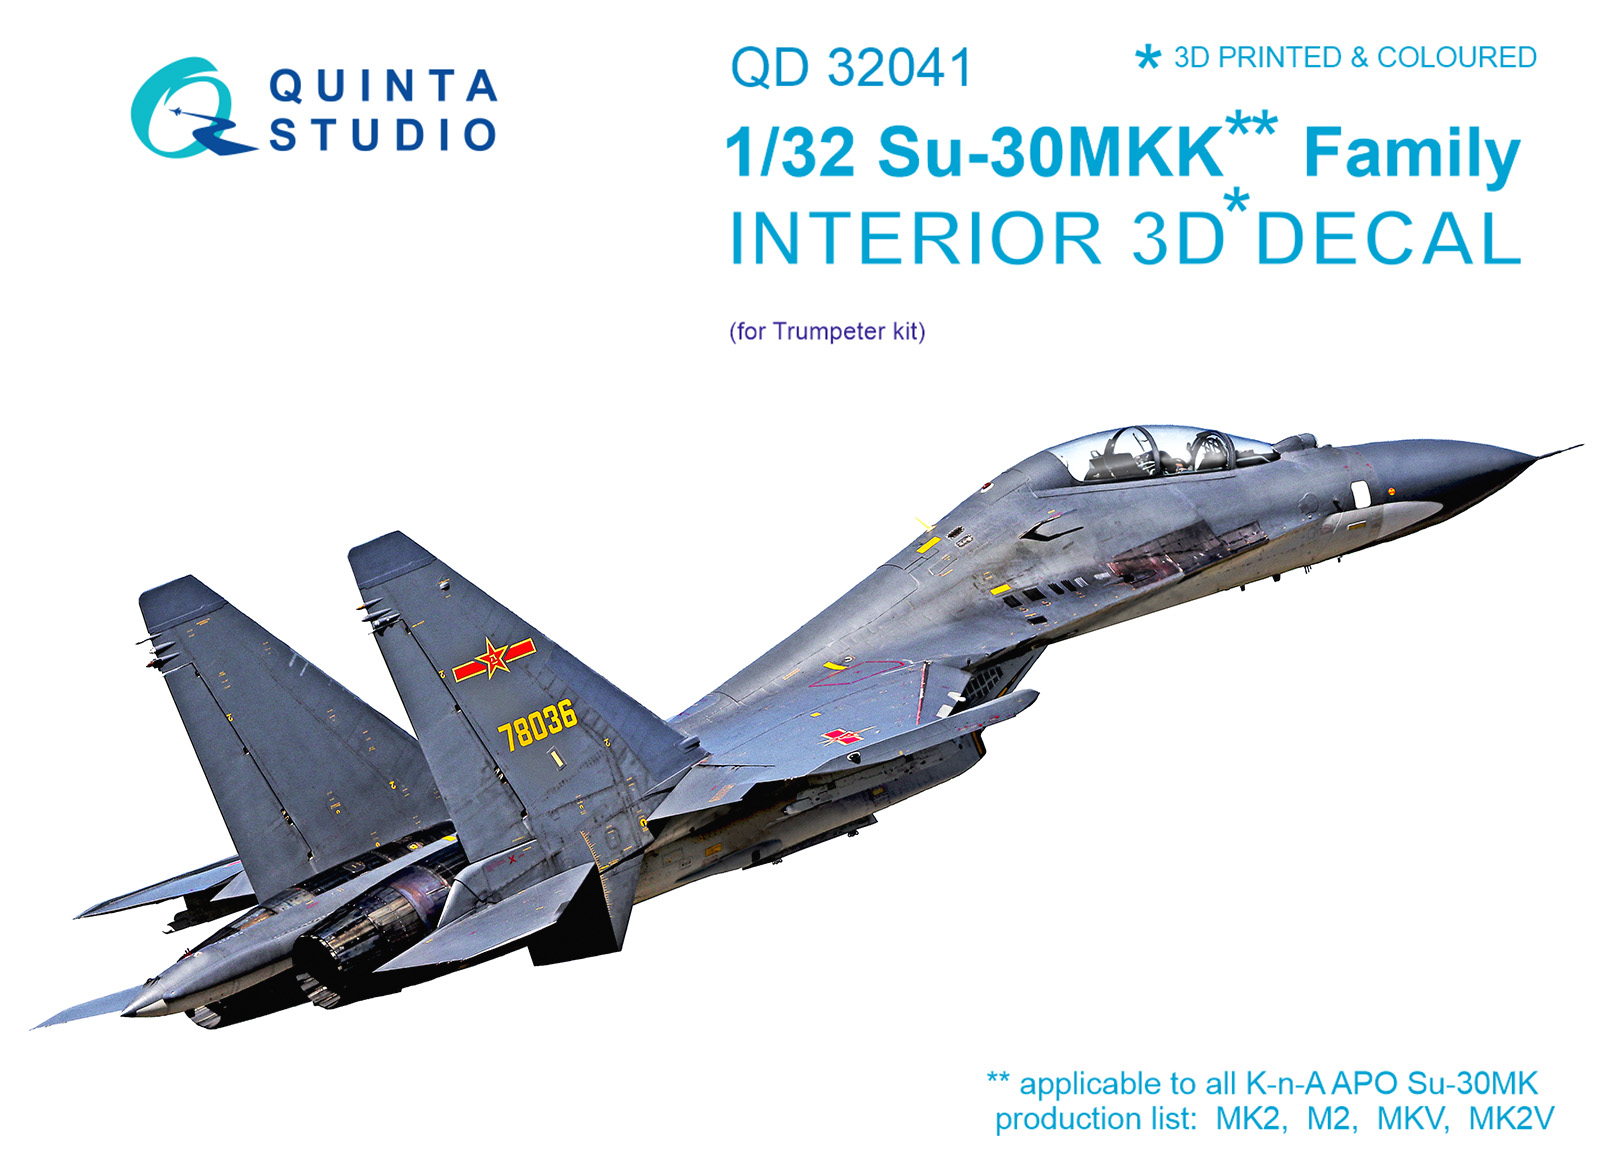 Su-30MKK 3D-Printed & coloured Interior on decal paper (for Trumpeter kit)